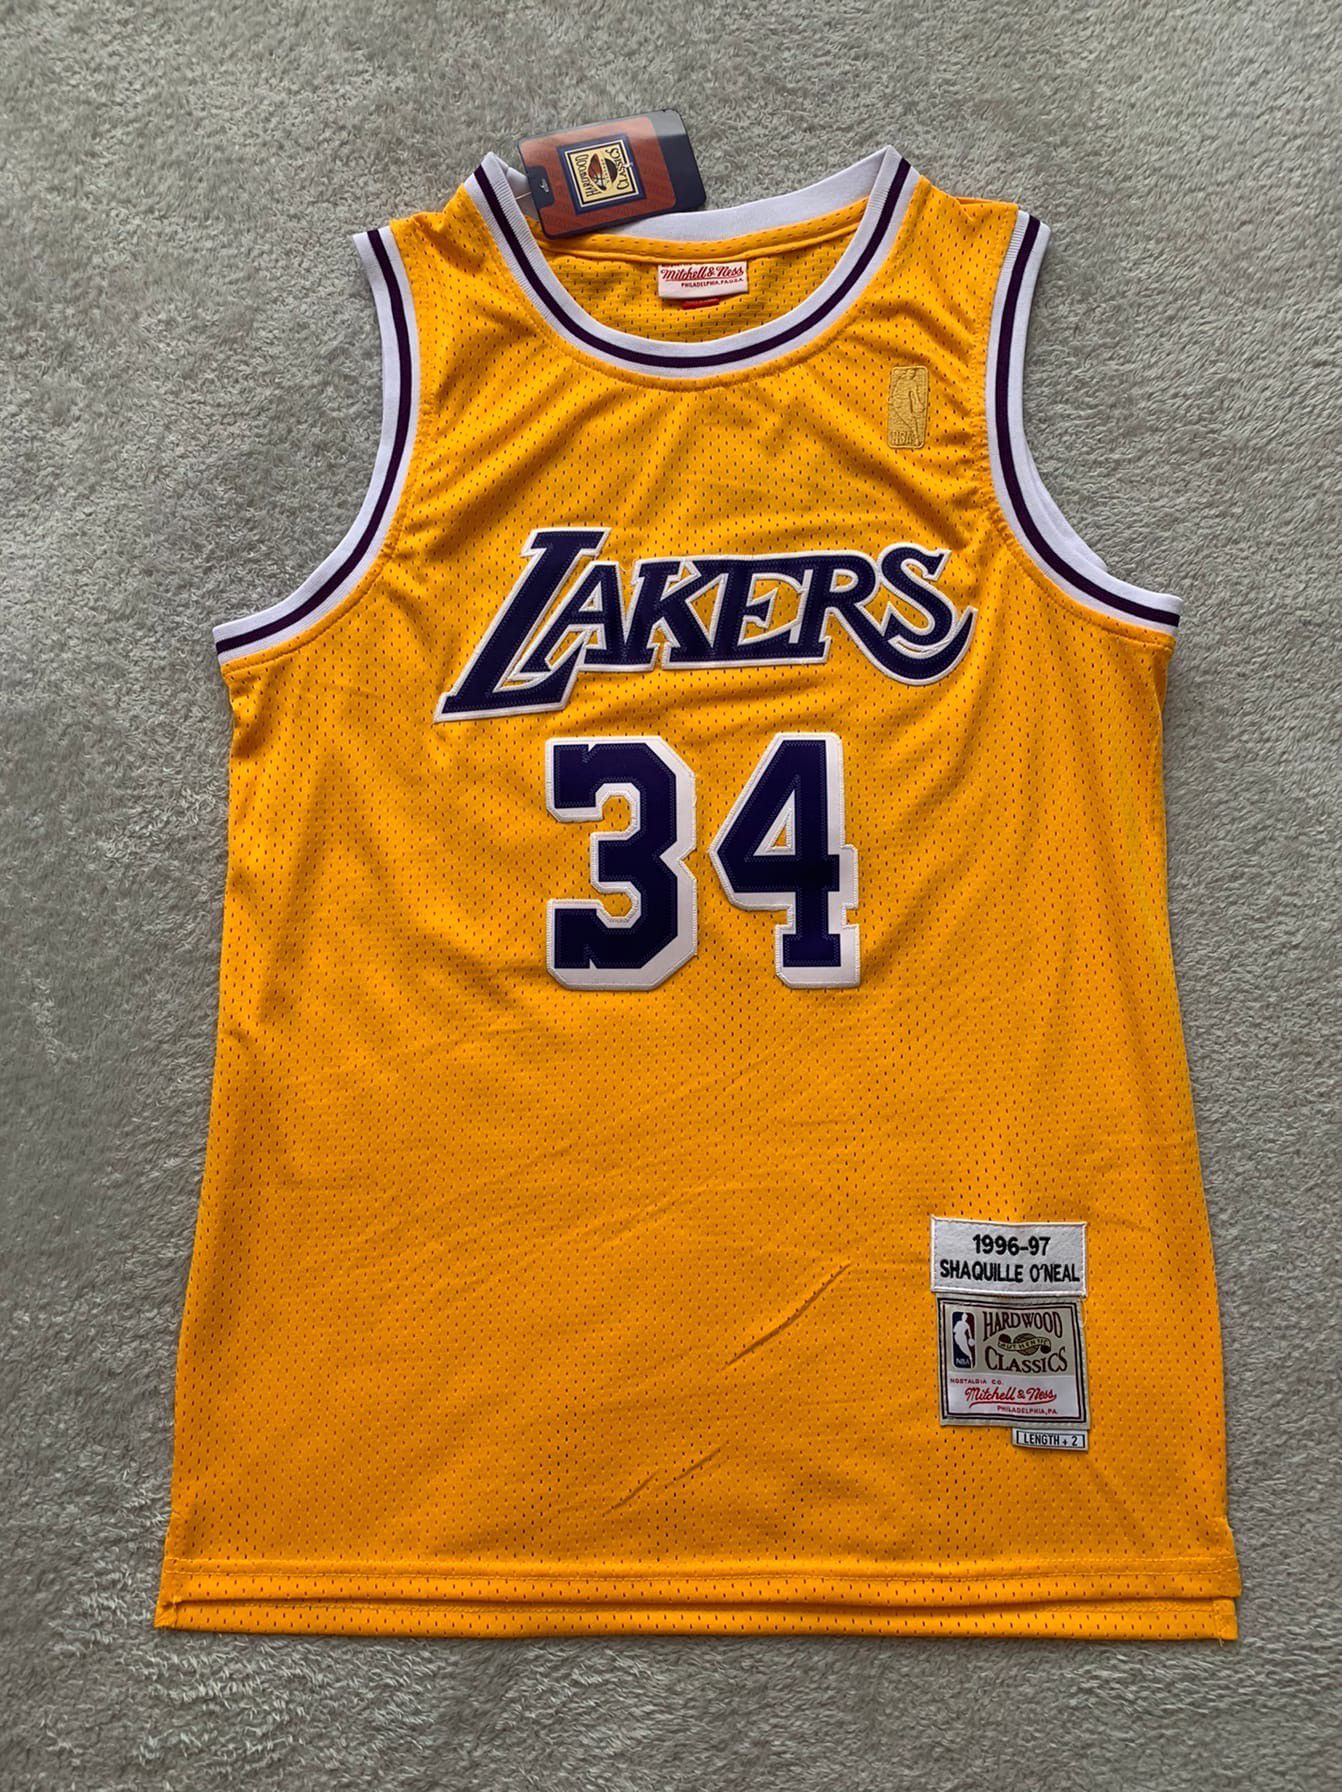 Shaquille "Shaq" O'Neal #34 - Los Angeles Lakers Team Jersey - Brand New Men’s Gold Hardwood Classics NBA Basketball Jersey - Size M / L / XL